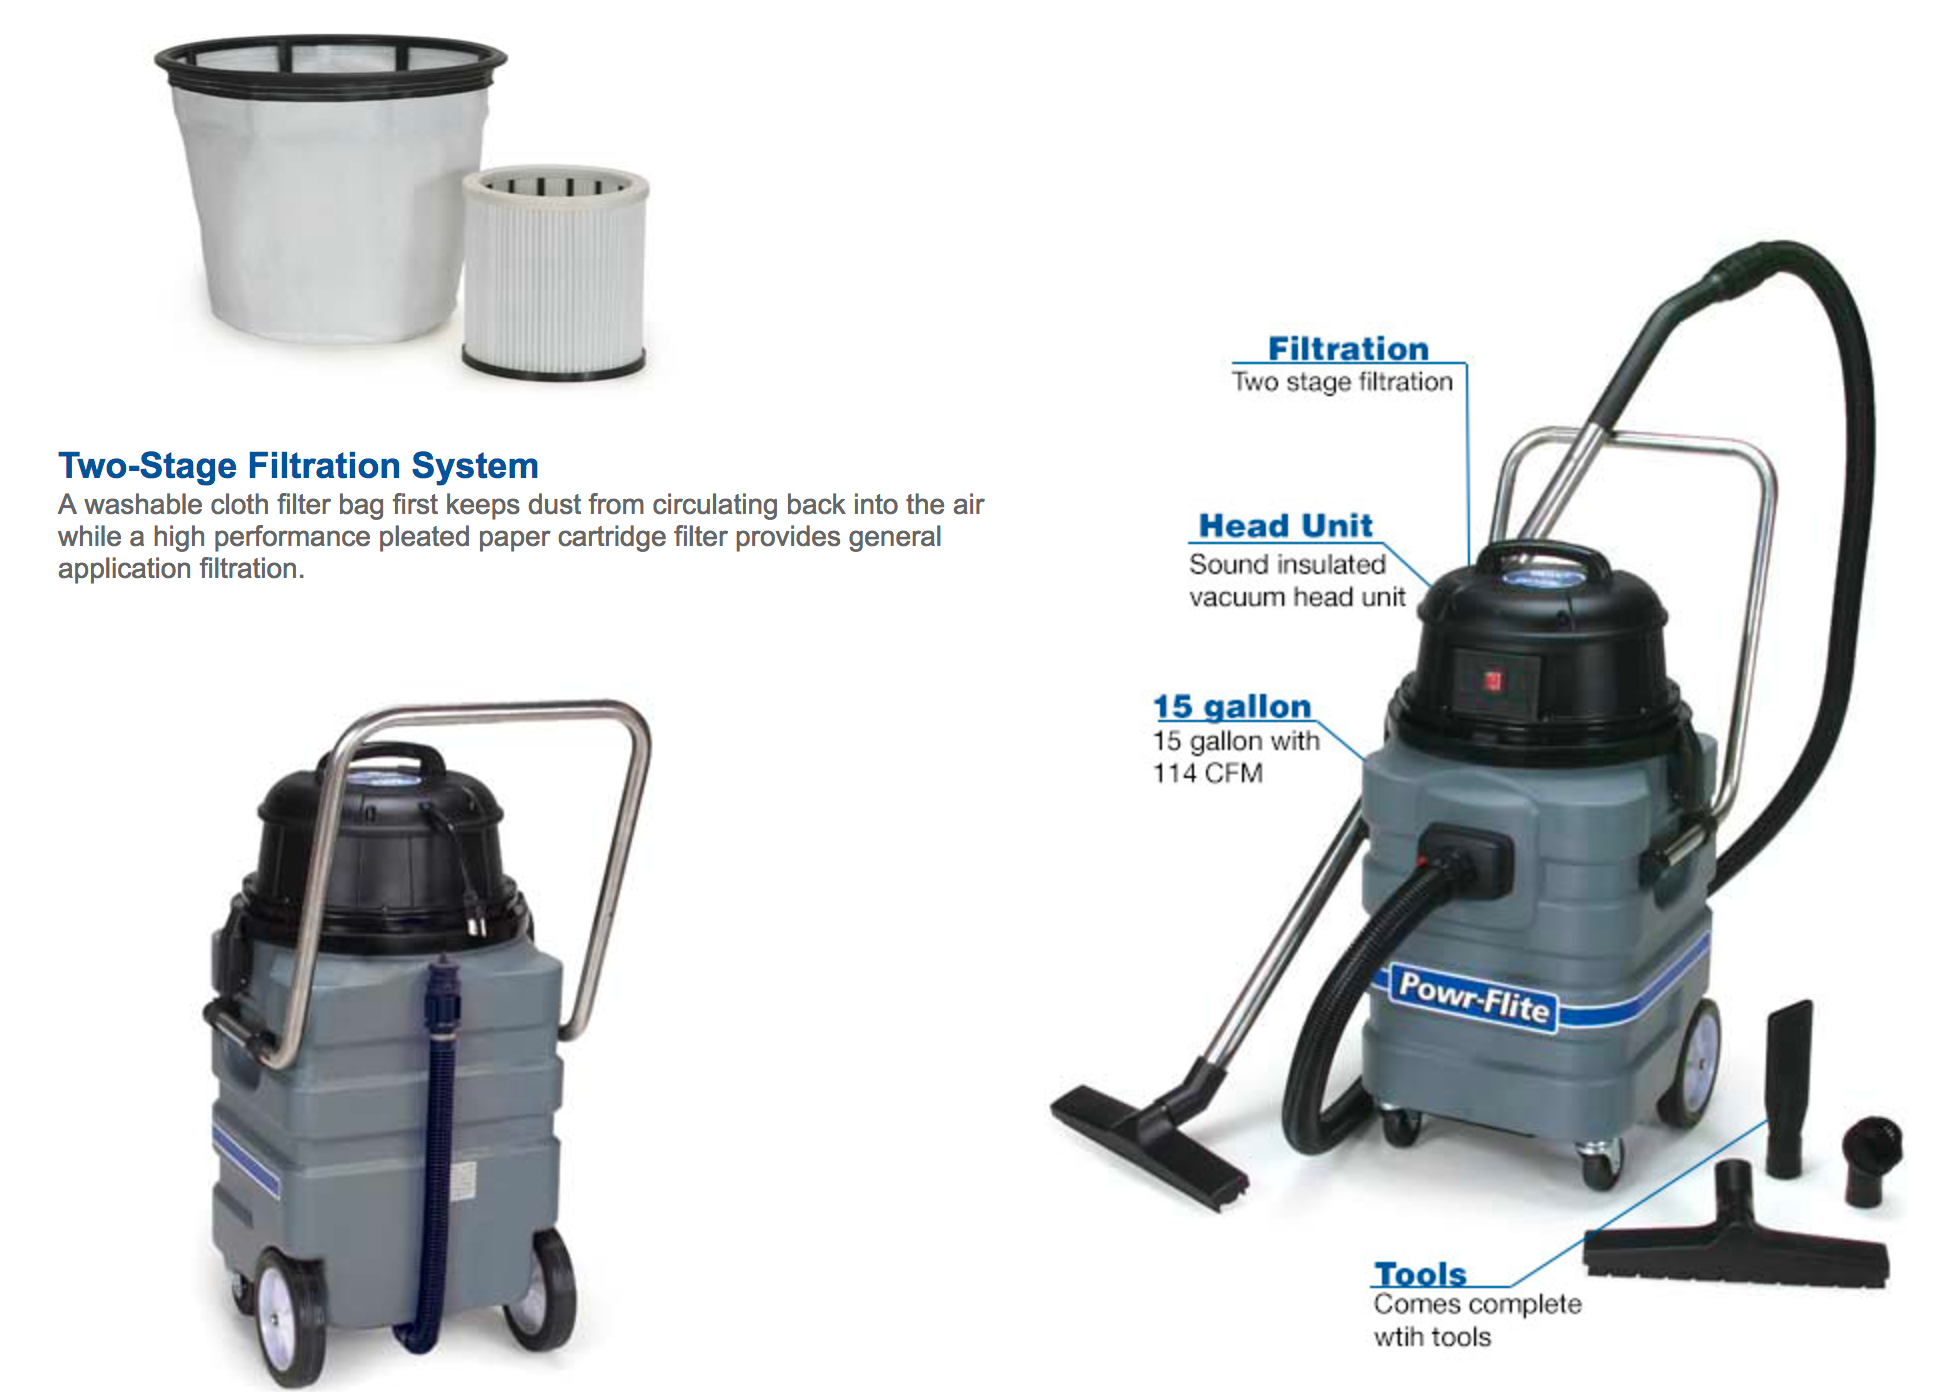 Powr-Flite’s Wet/Dry Vacuums feature a two stage filtration process with a washable permanent cloth filter bag which keeps dust from circulating back into the air and a super performance pleated paper cartridge filter for more efficient general cleaning filtration